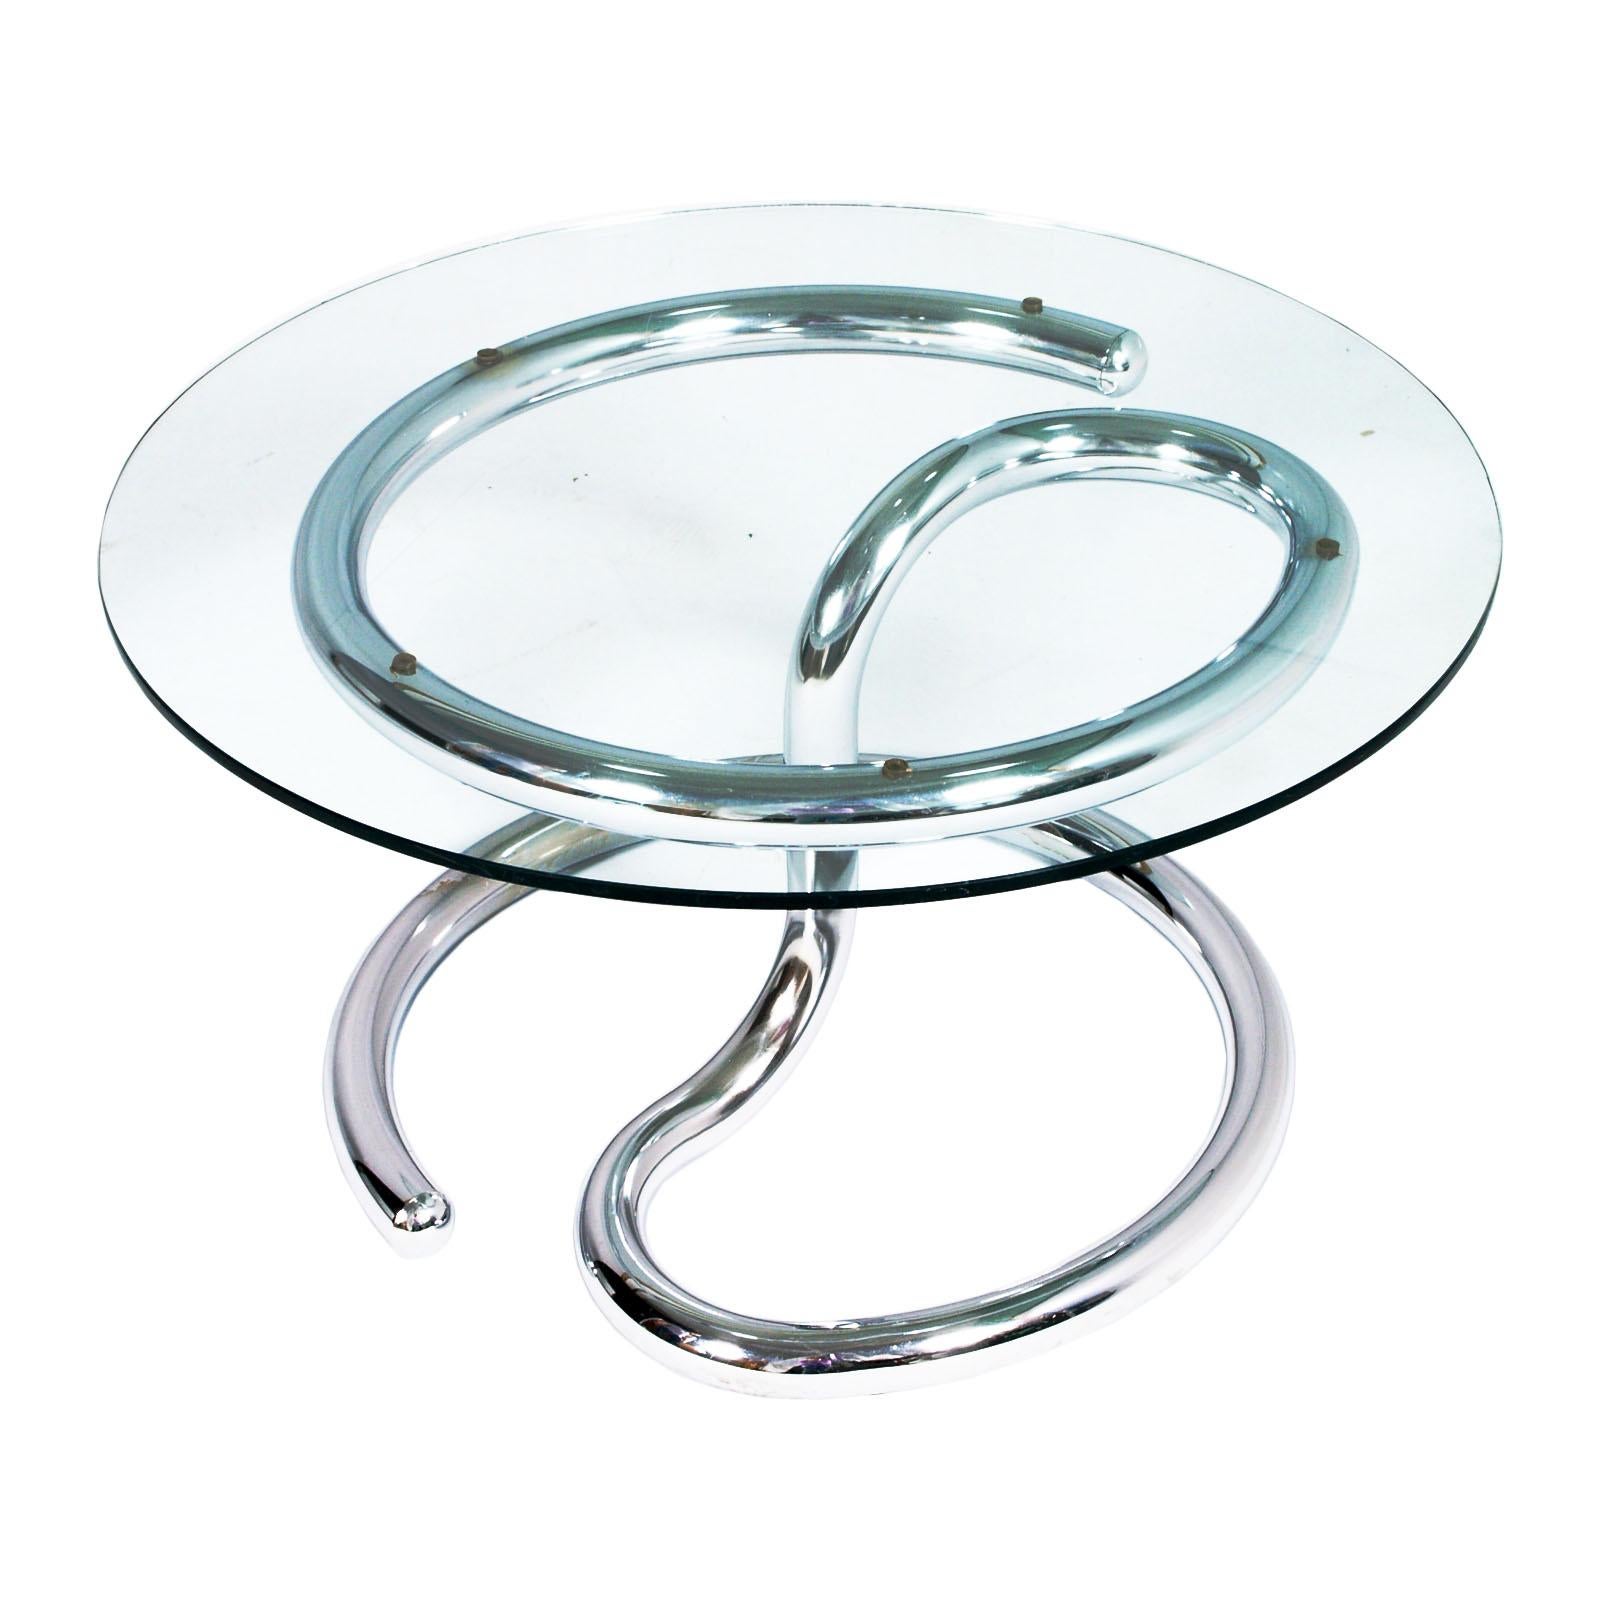 1970s Steel Chrome and Glass "Cobra" Coffee Table Attributed to Giotto Stoppino